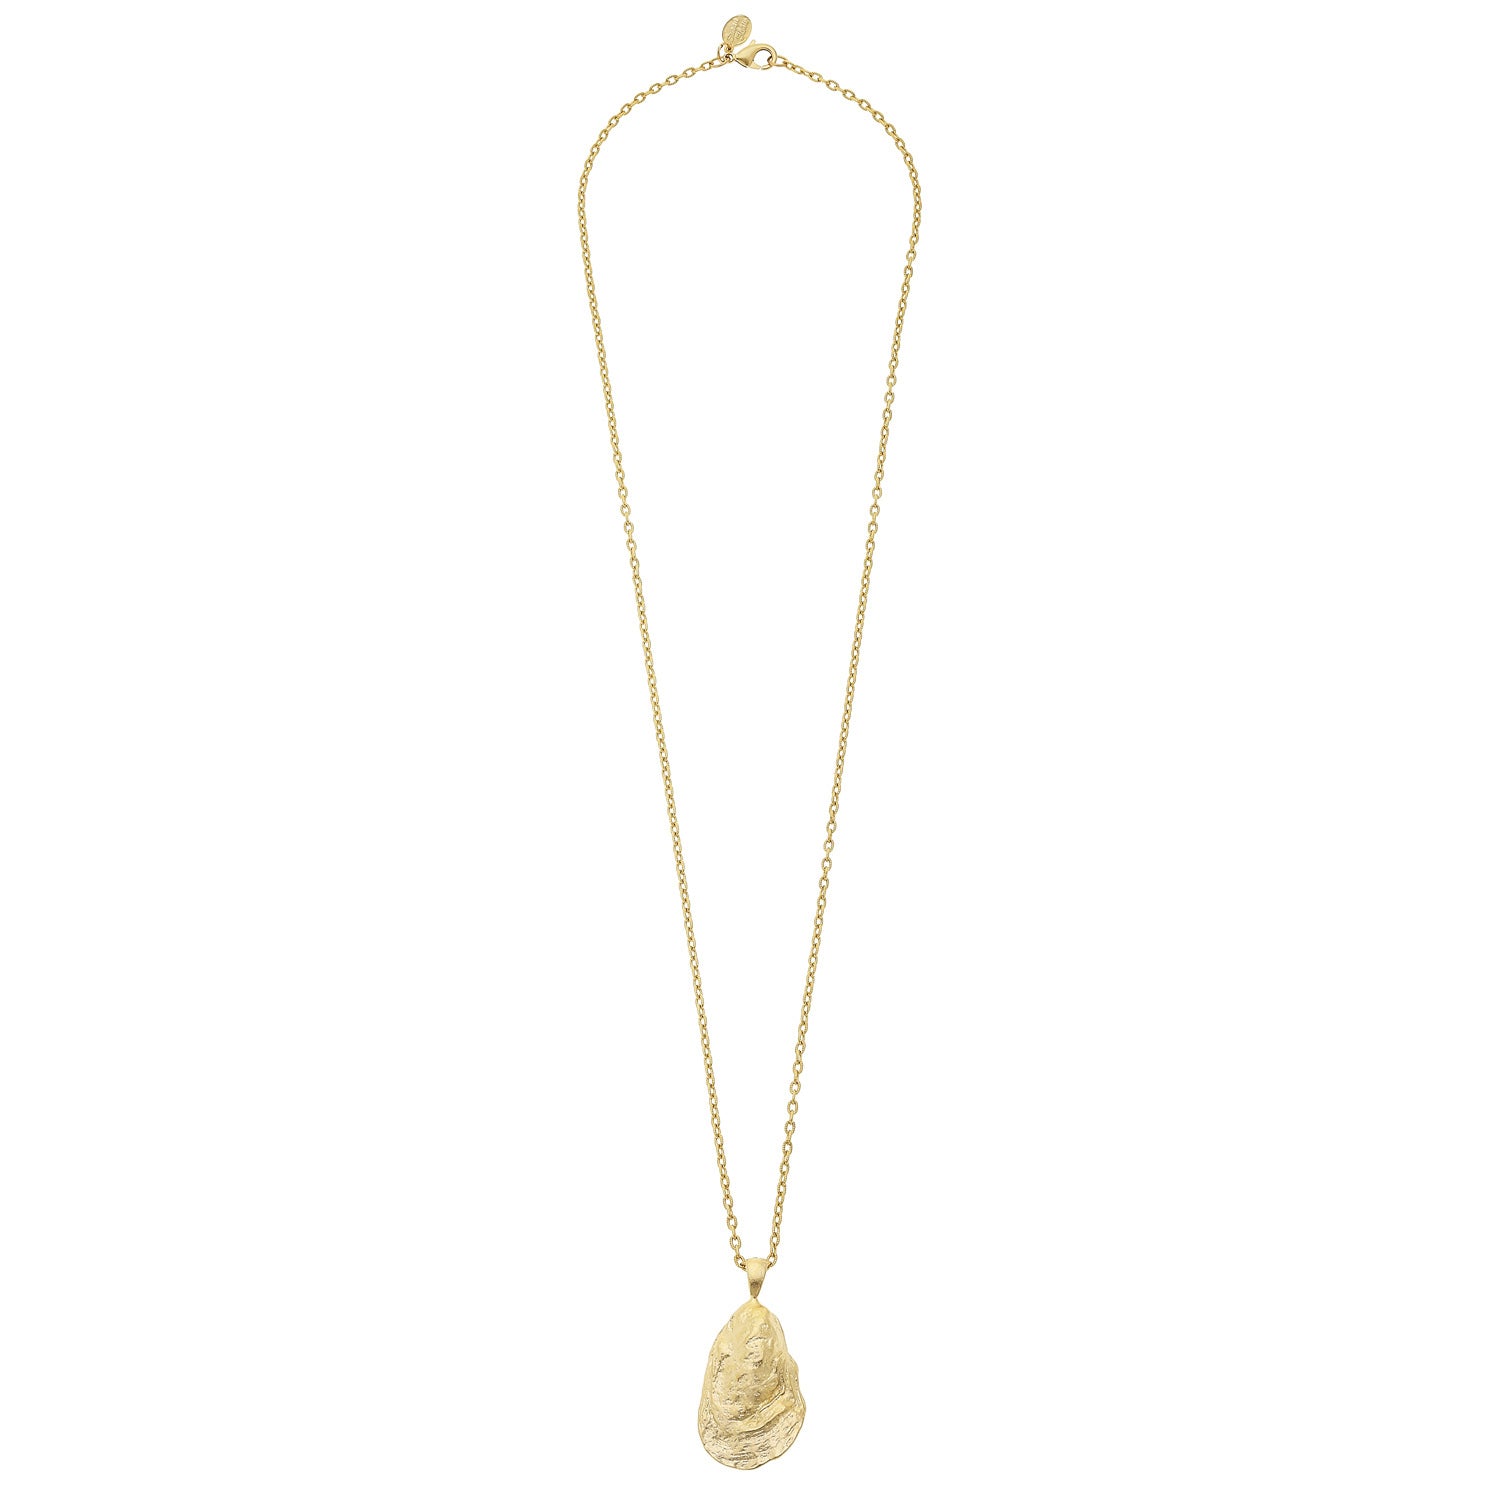 Susan Shaw Handcast Gold Oyster Necklace, 30"